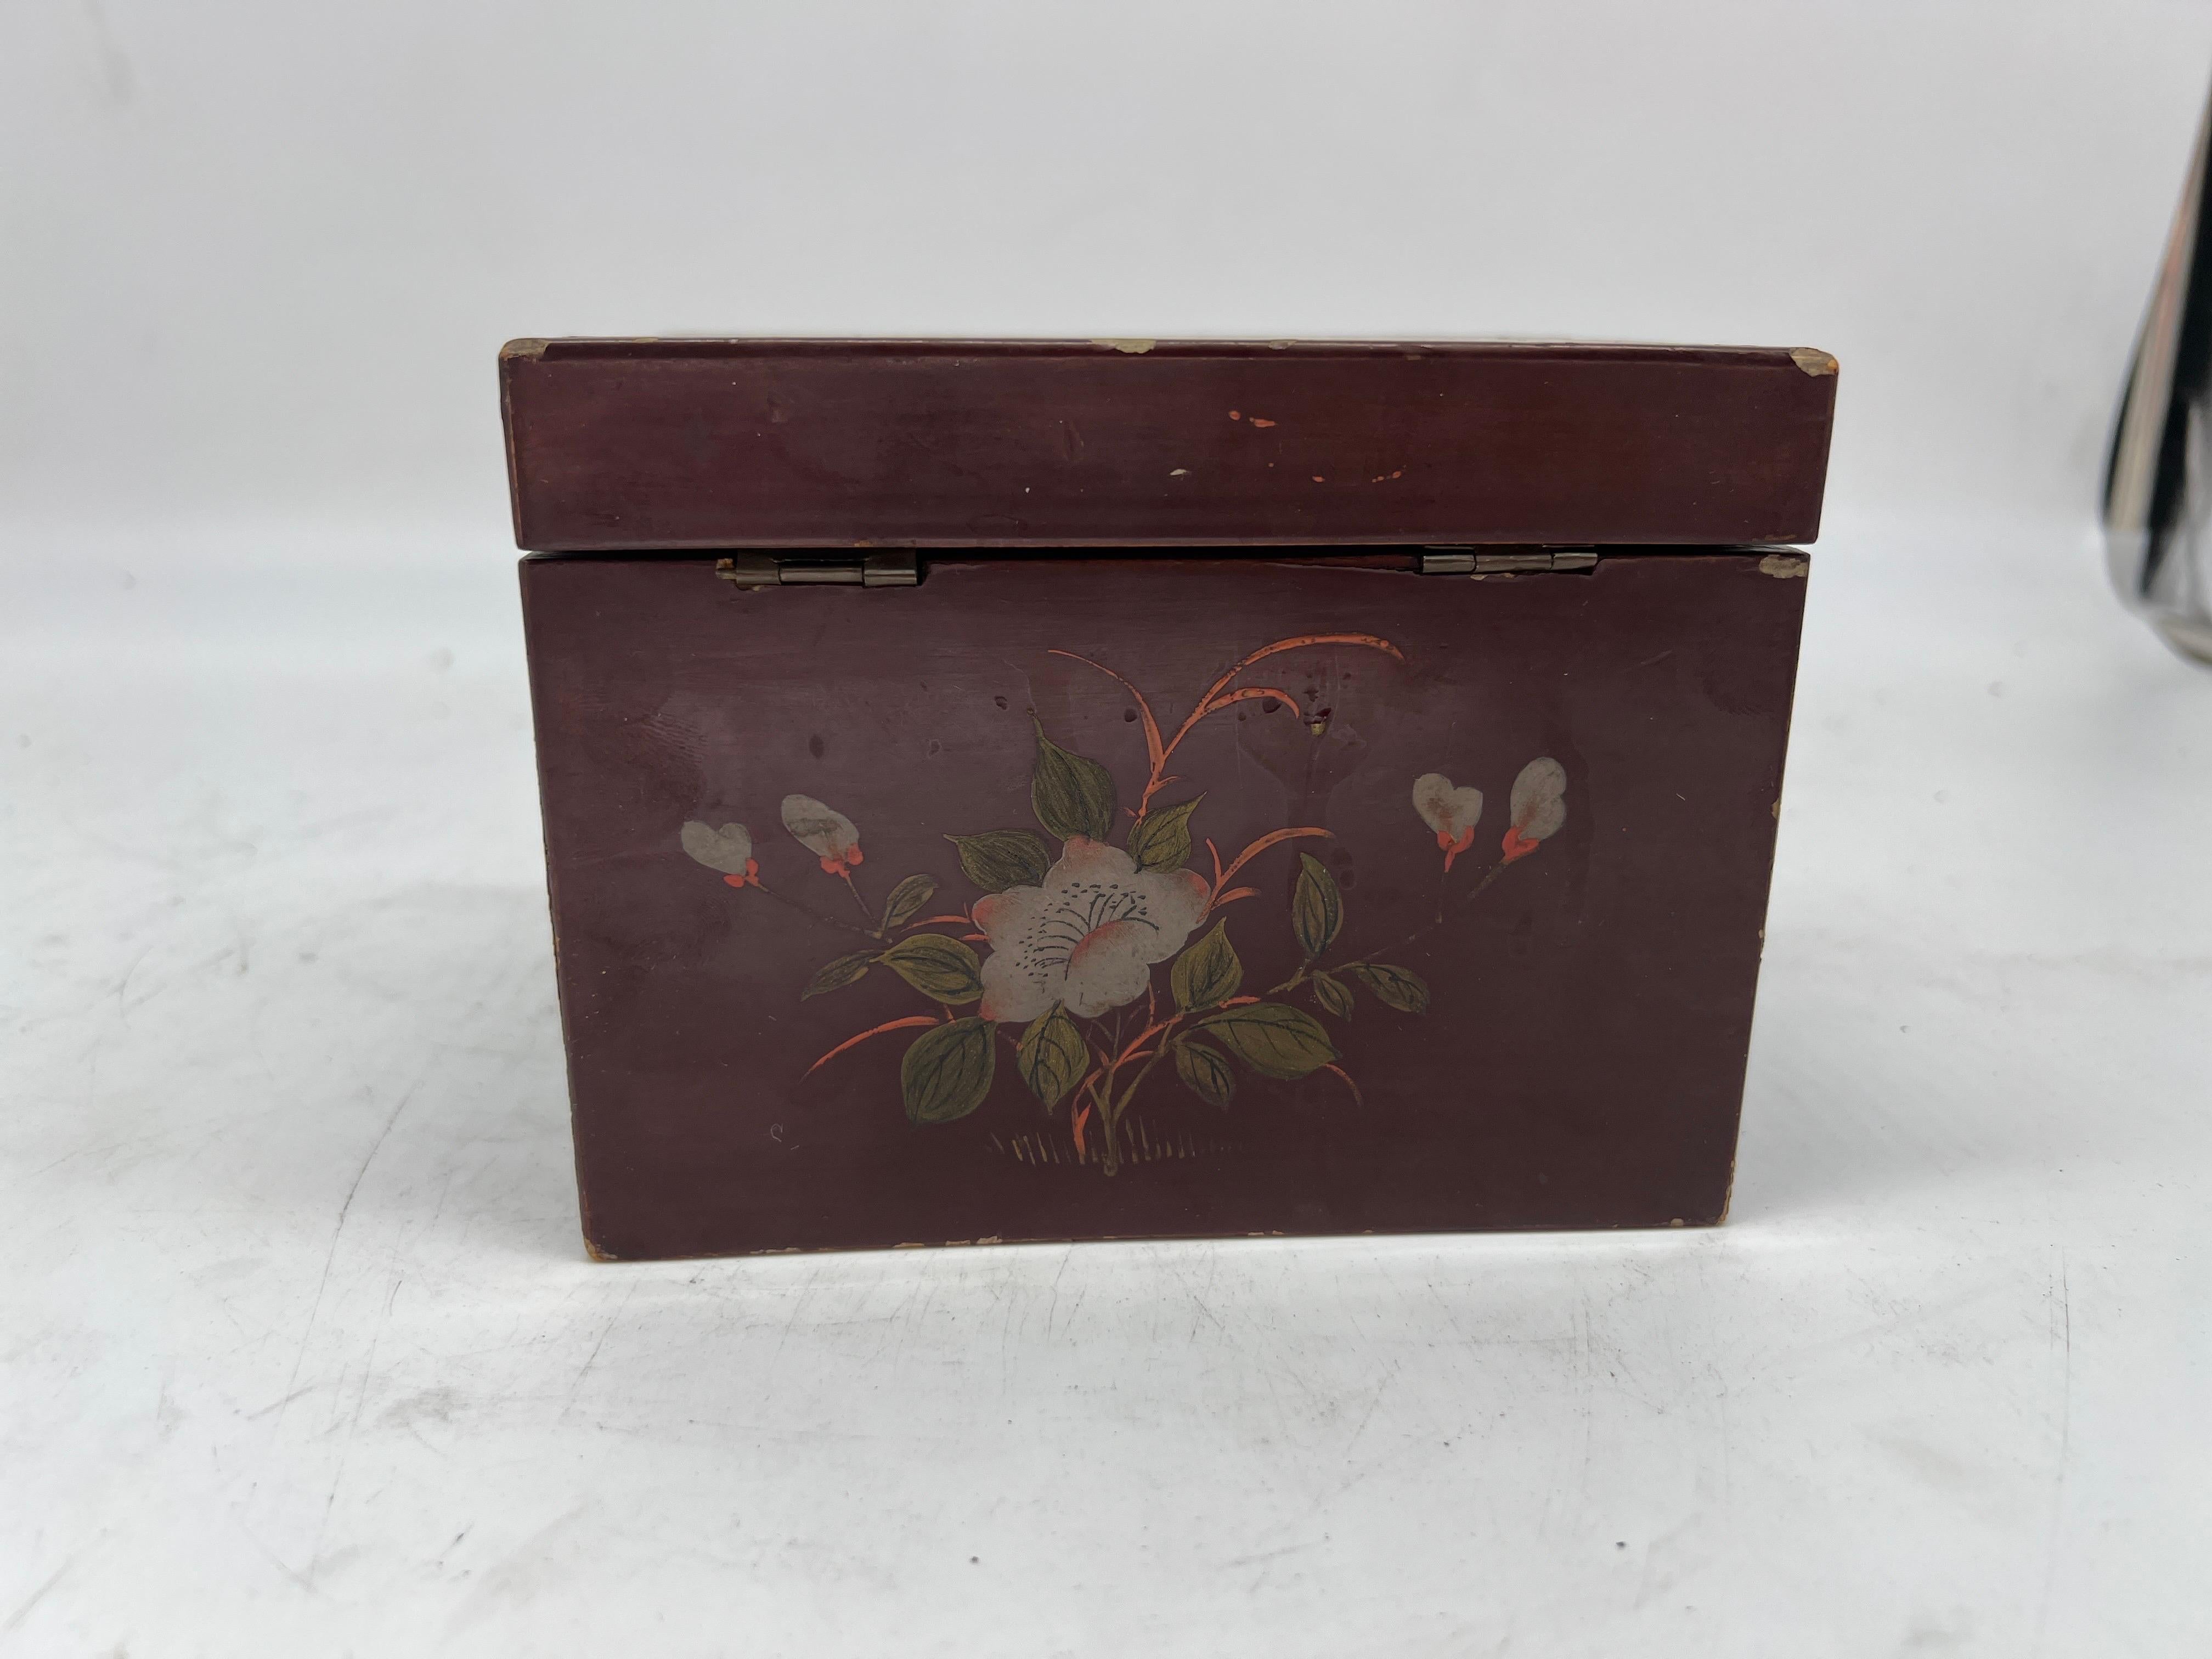 Wood Ying Mee & Co., Antique Chinese Lacquer Tea Caddy or Box For Sale